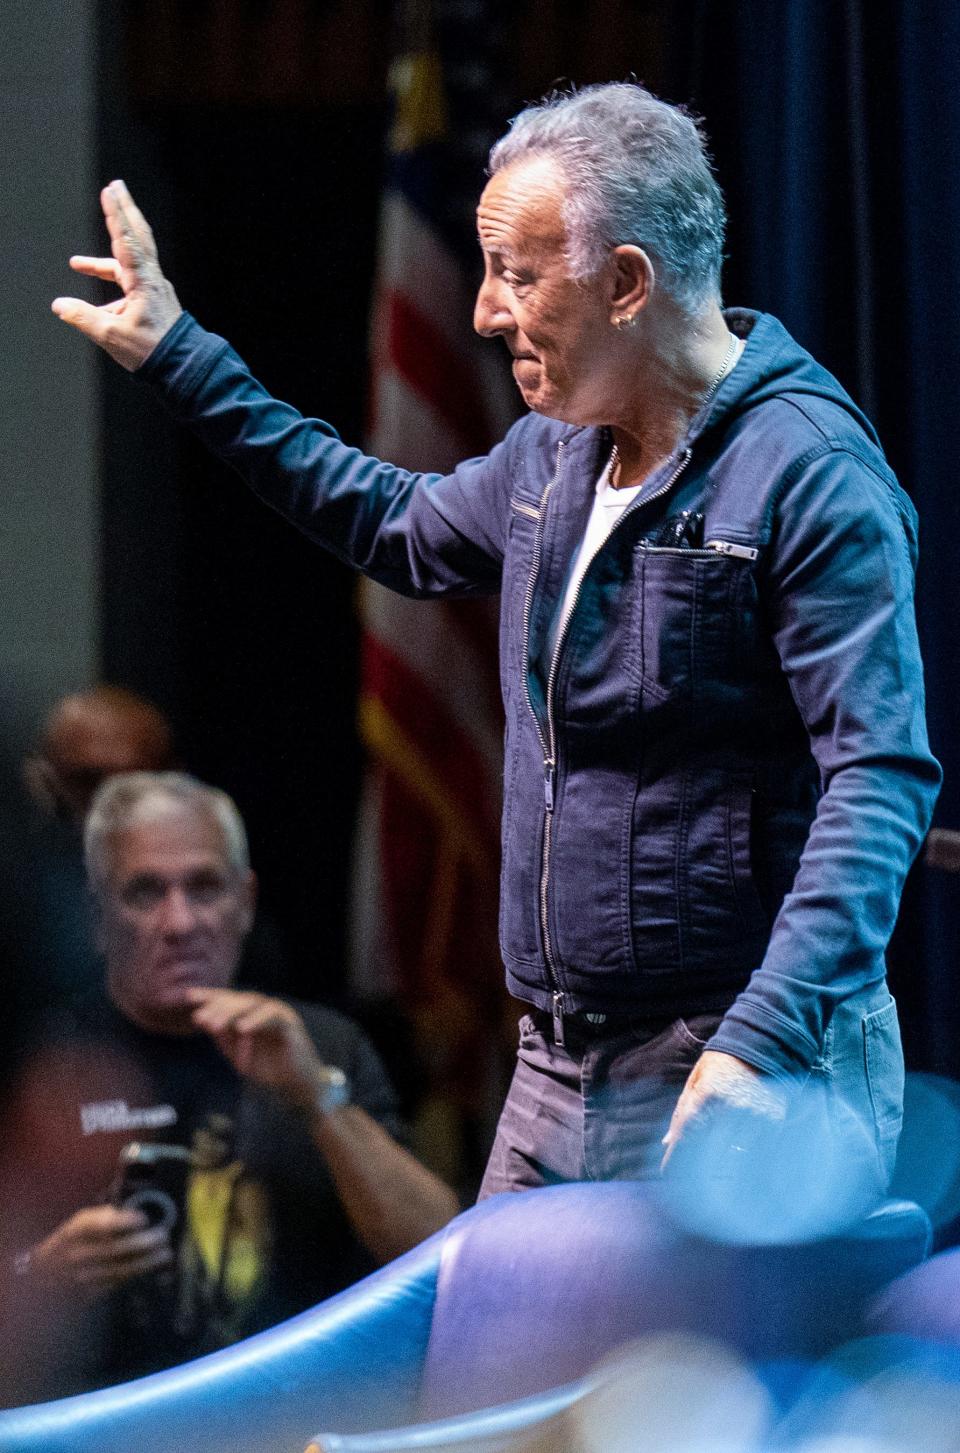 Bruce Springsteen and others commemorating the 50th anniversary of "The Wild, the Innocent & and the E Street Shuffle" at the Bruce Springsteen Archives and Center for American Music at Monmouth University in West Long Branch on Saturday, Oct. 28.